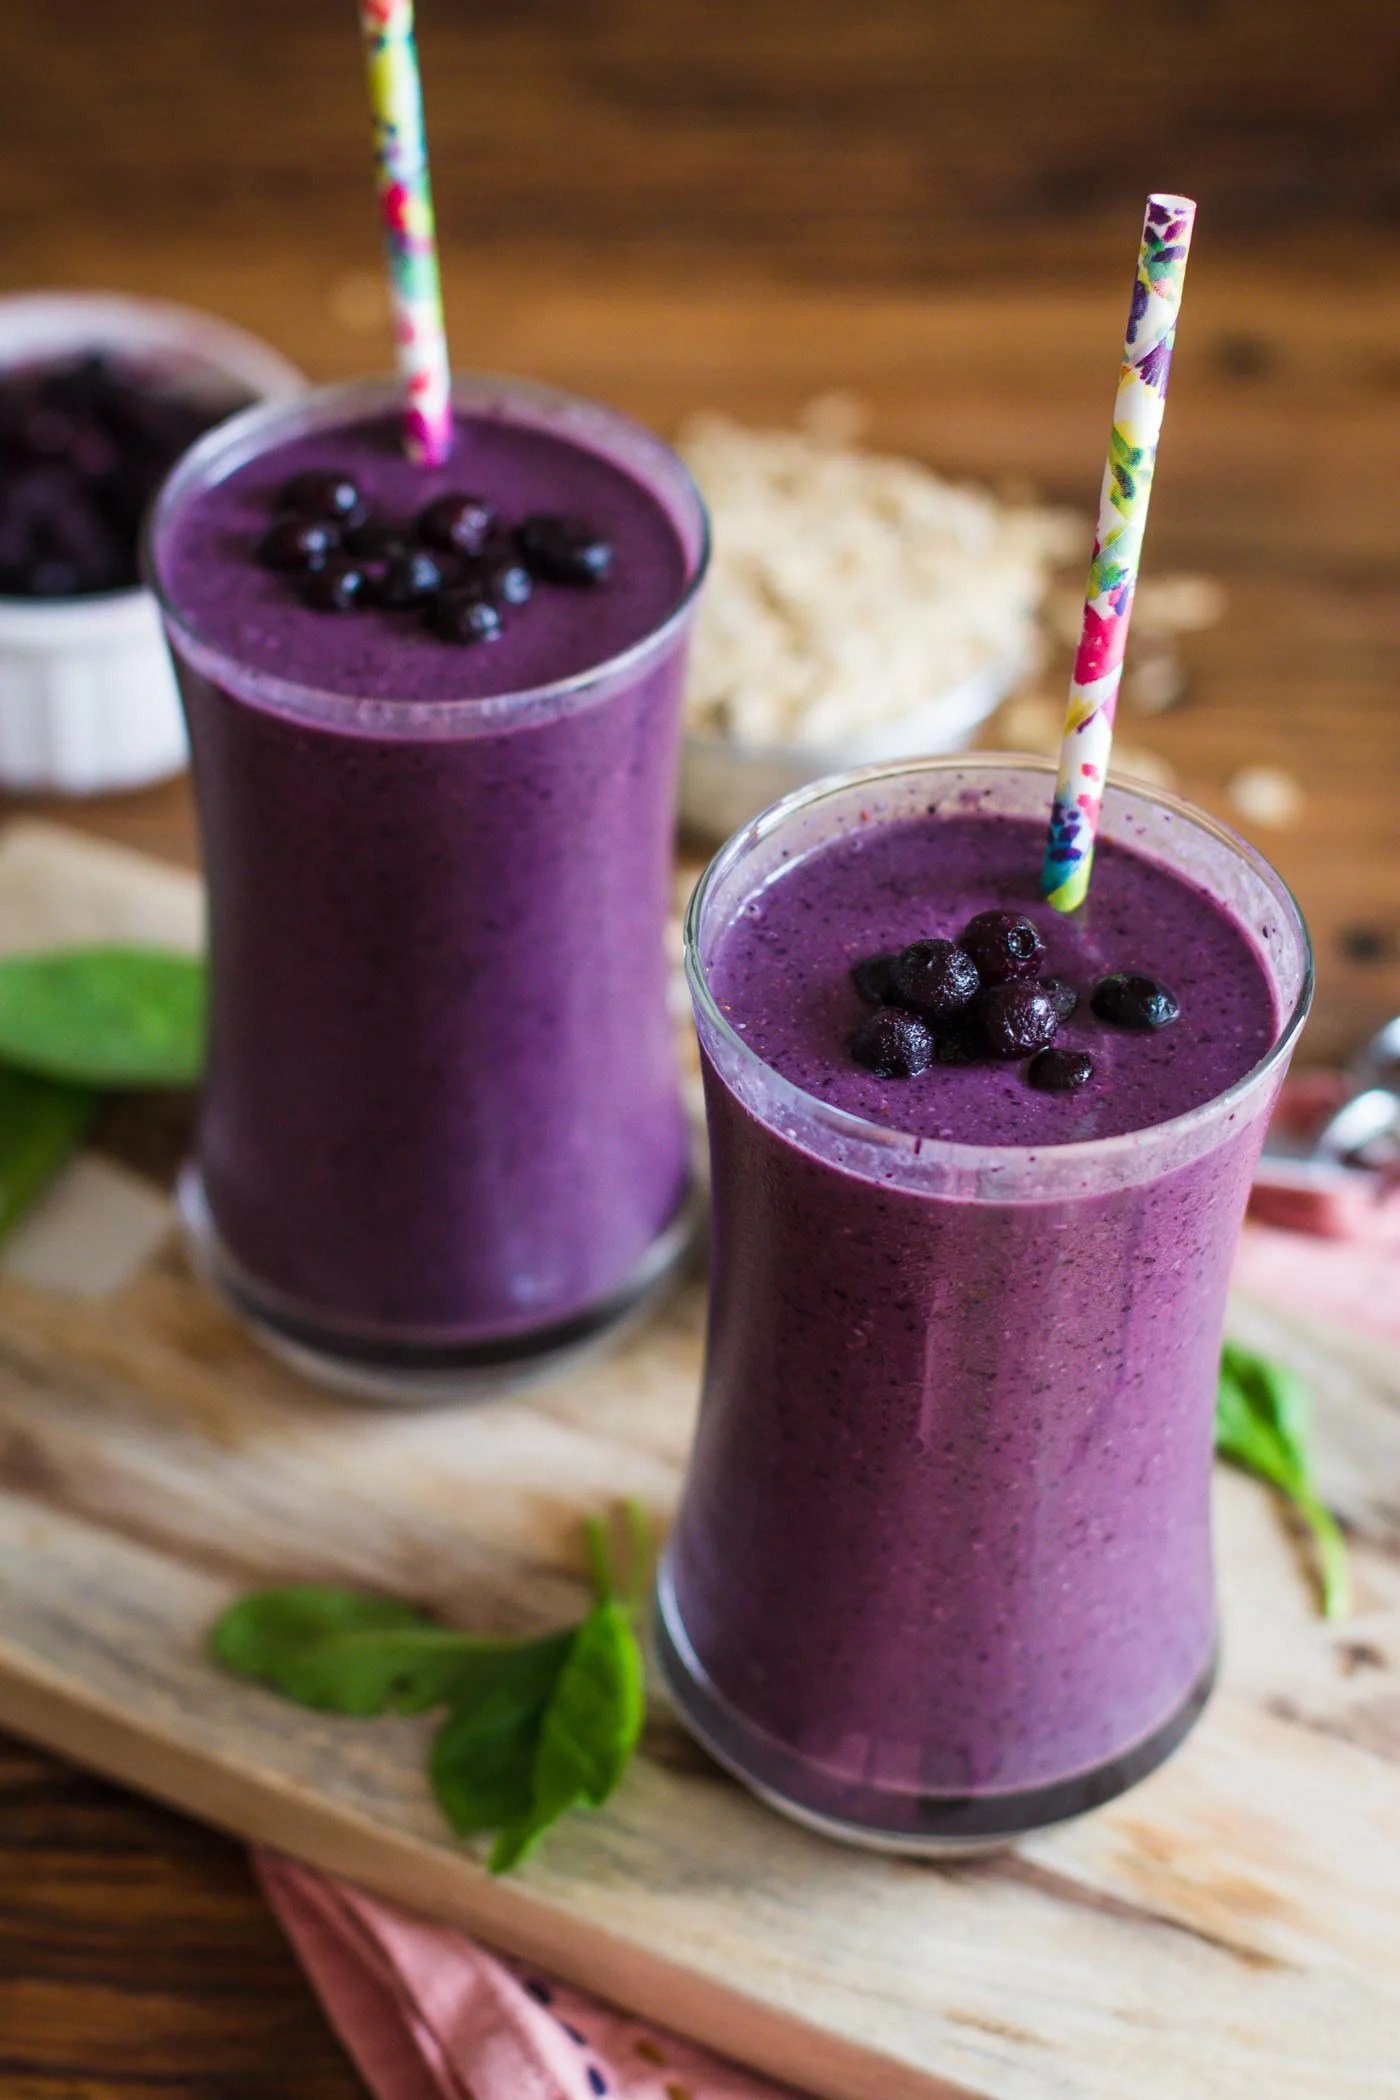 Meal Replacement Blueberry Green Smoothie